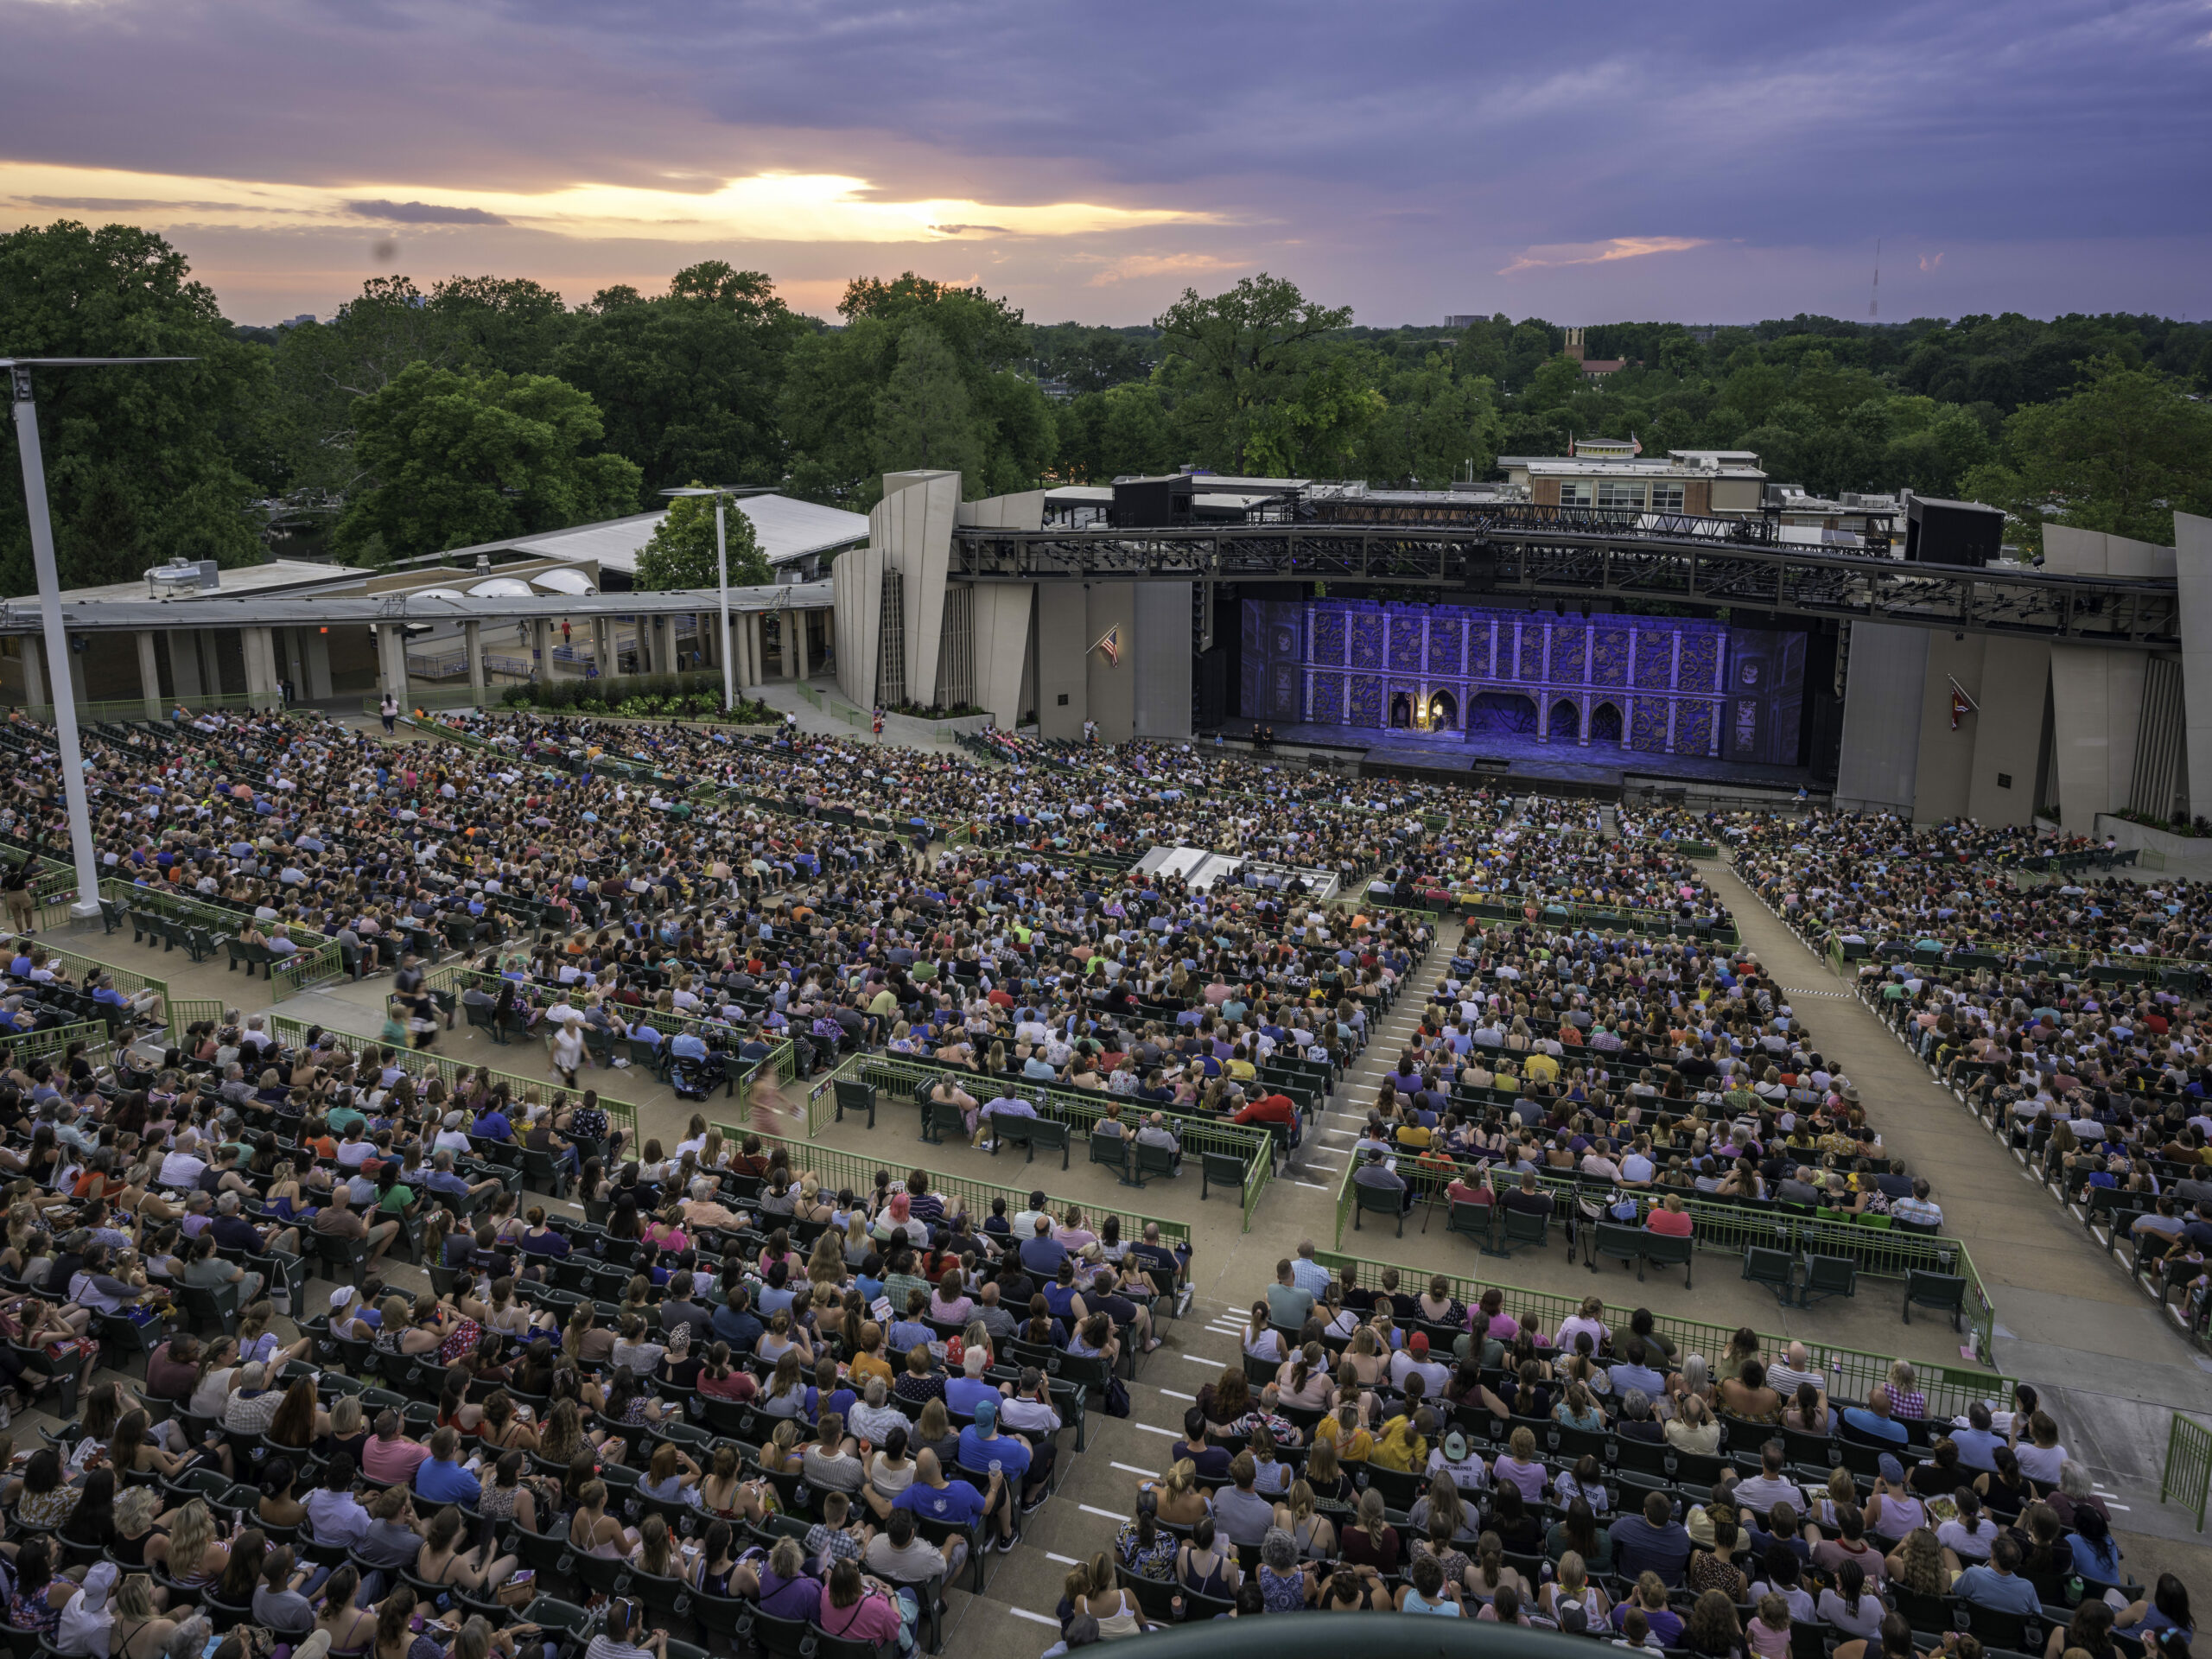 St. Louis Muny season tickets and musical theatres near you